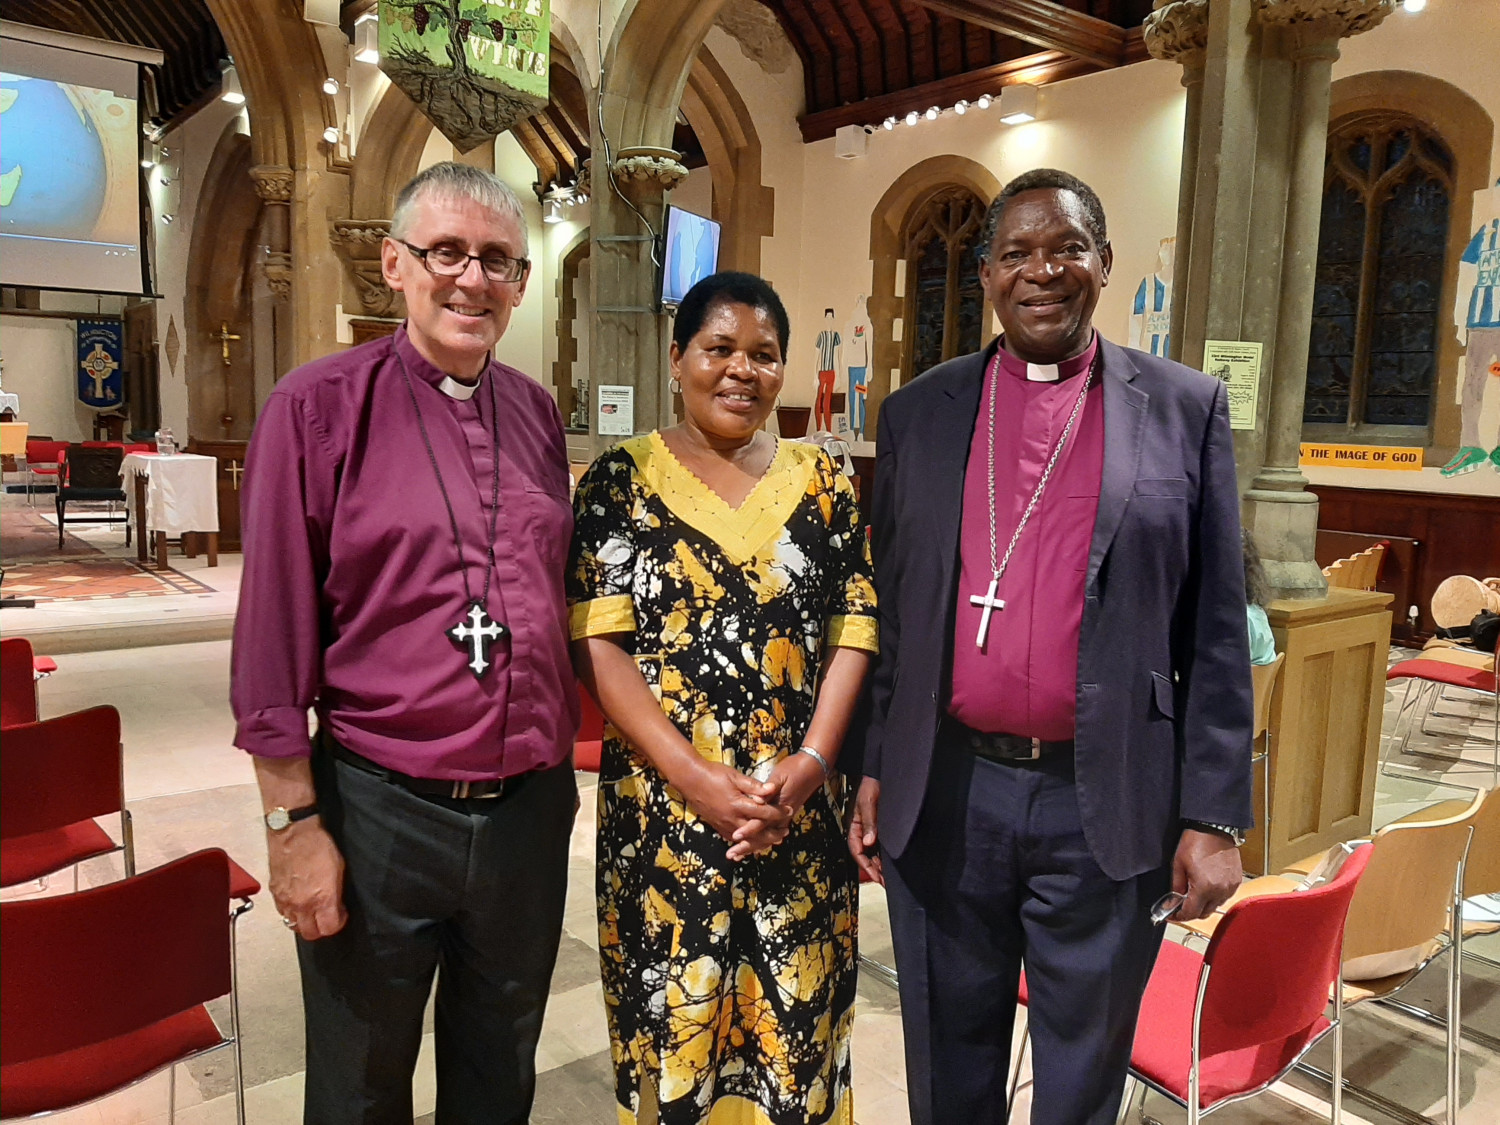 Bishop Simon, Rev Lilian and Bishop Given stand smiling at the camera inside the church